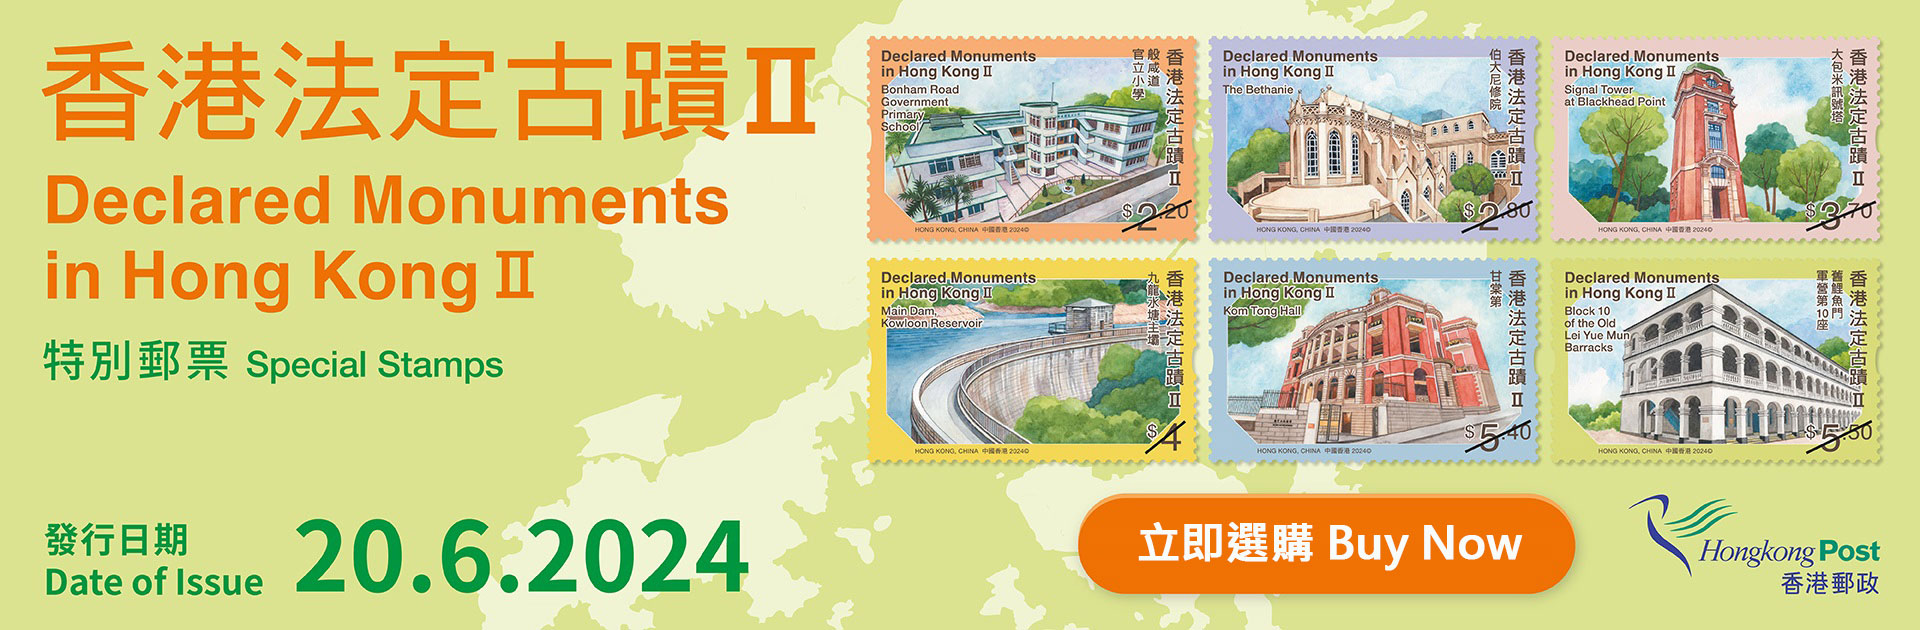 “Declared Monuments in Hong Kong II” Special Stamps